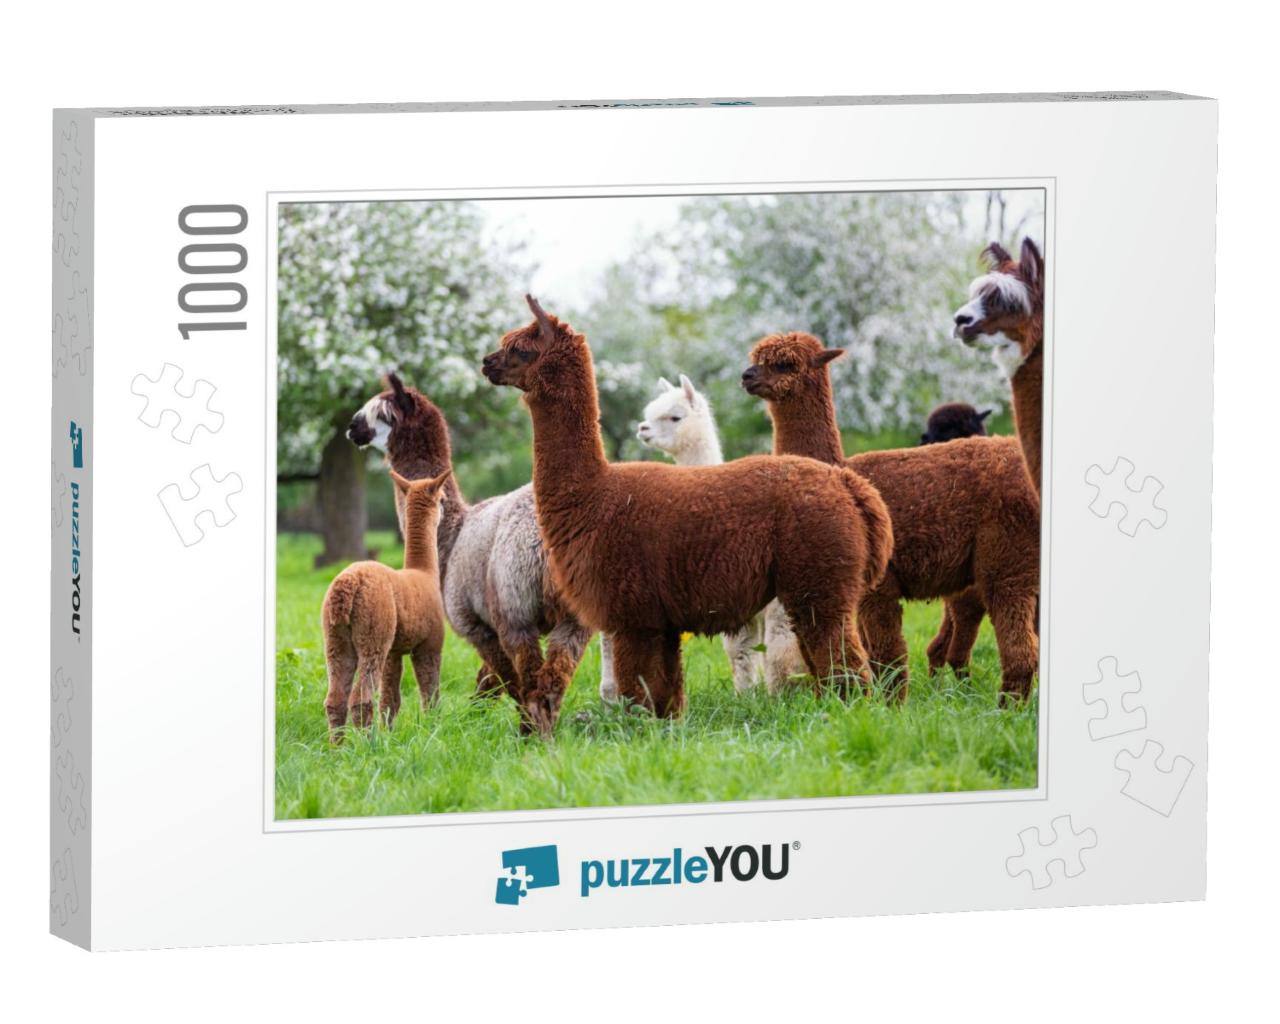 Alpaca Herd on a Spring Meadow, South American Mammals... Jigsaw Puzzle with 1000 pieces